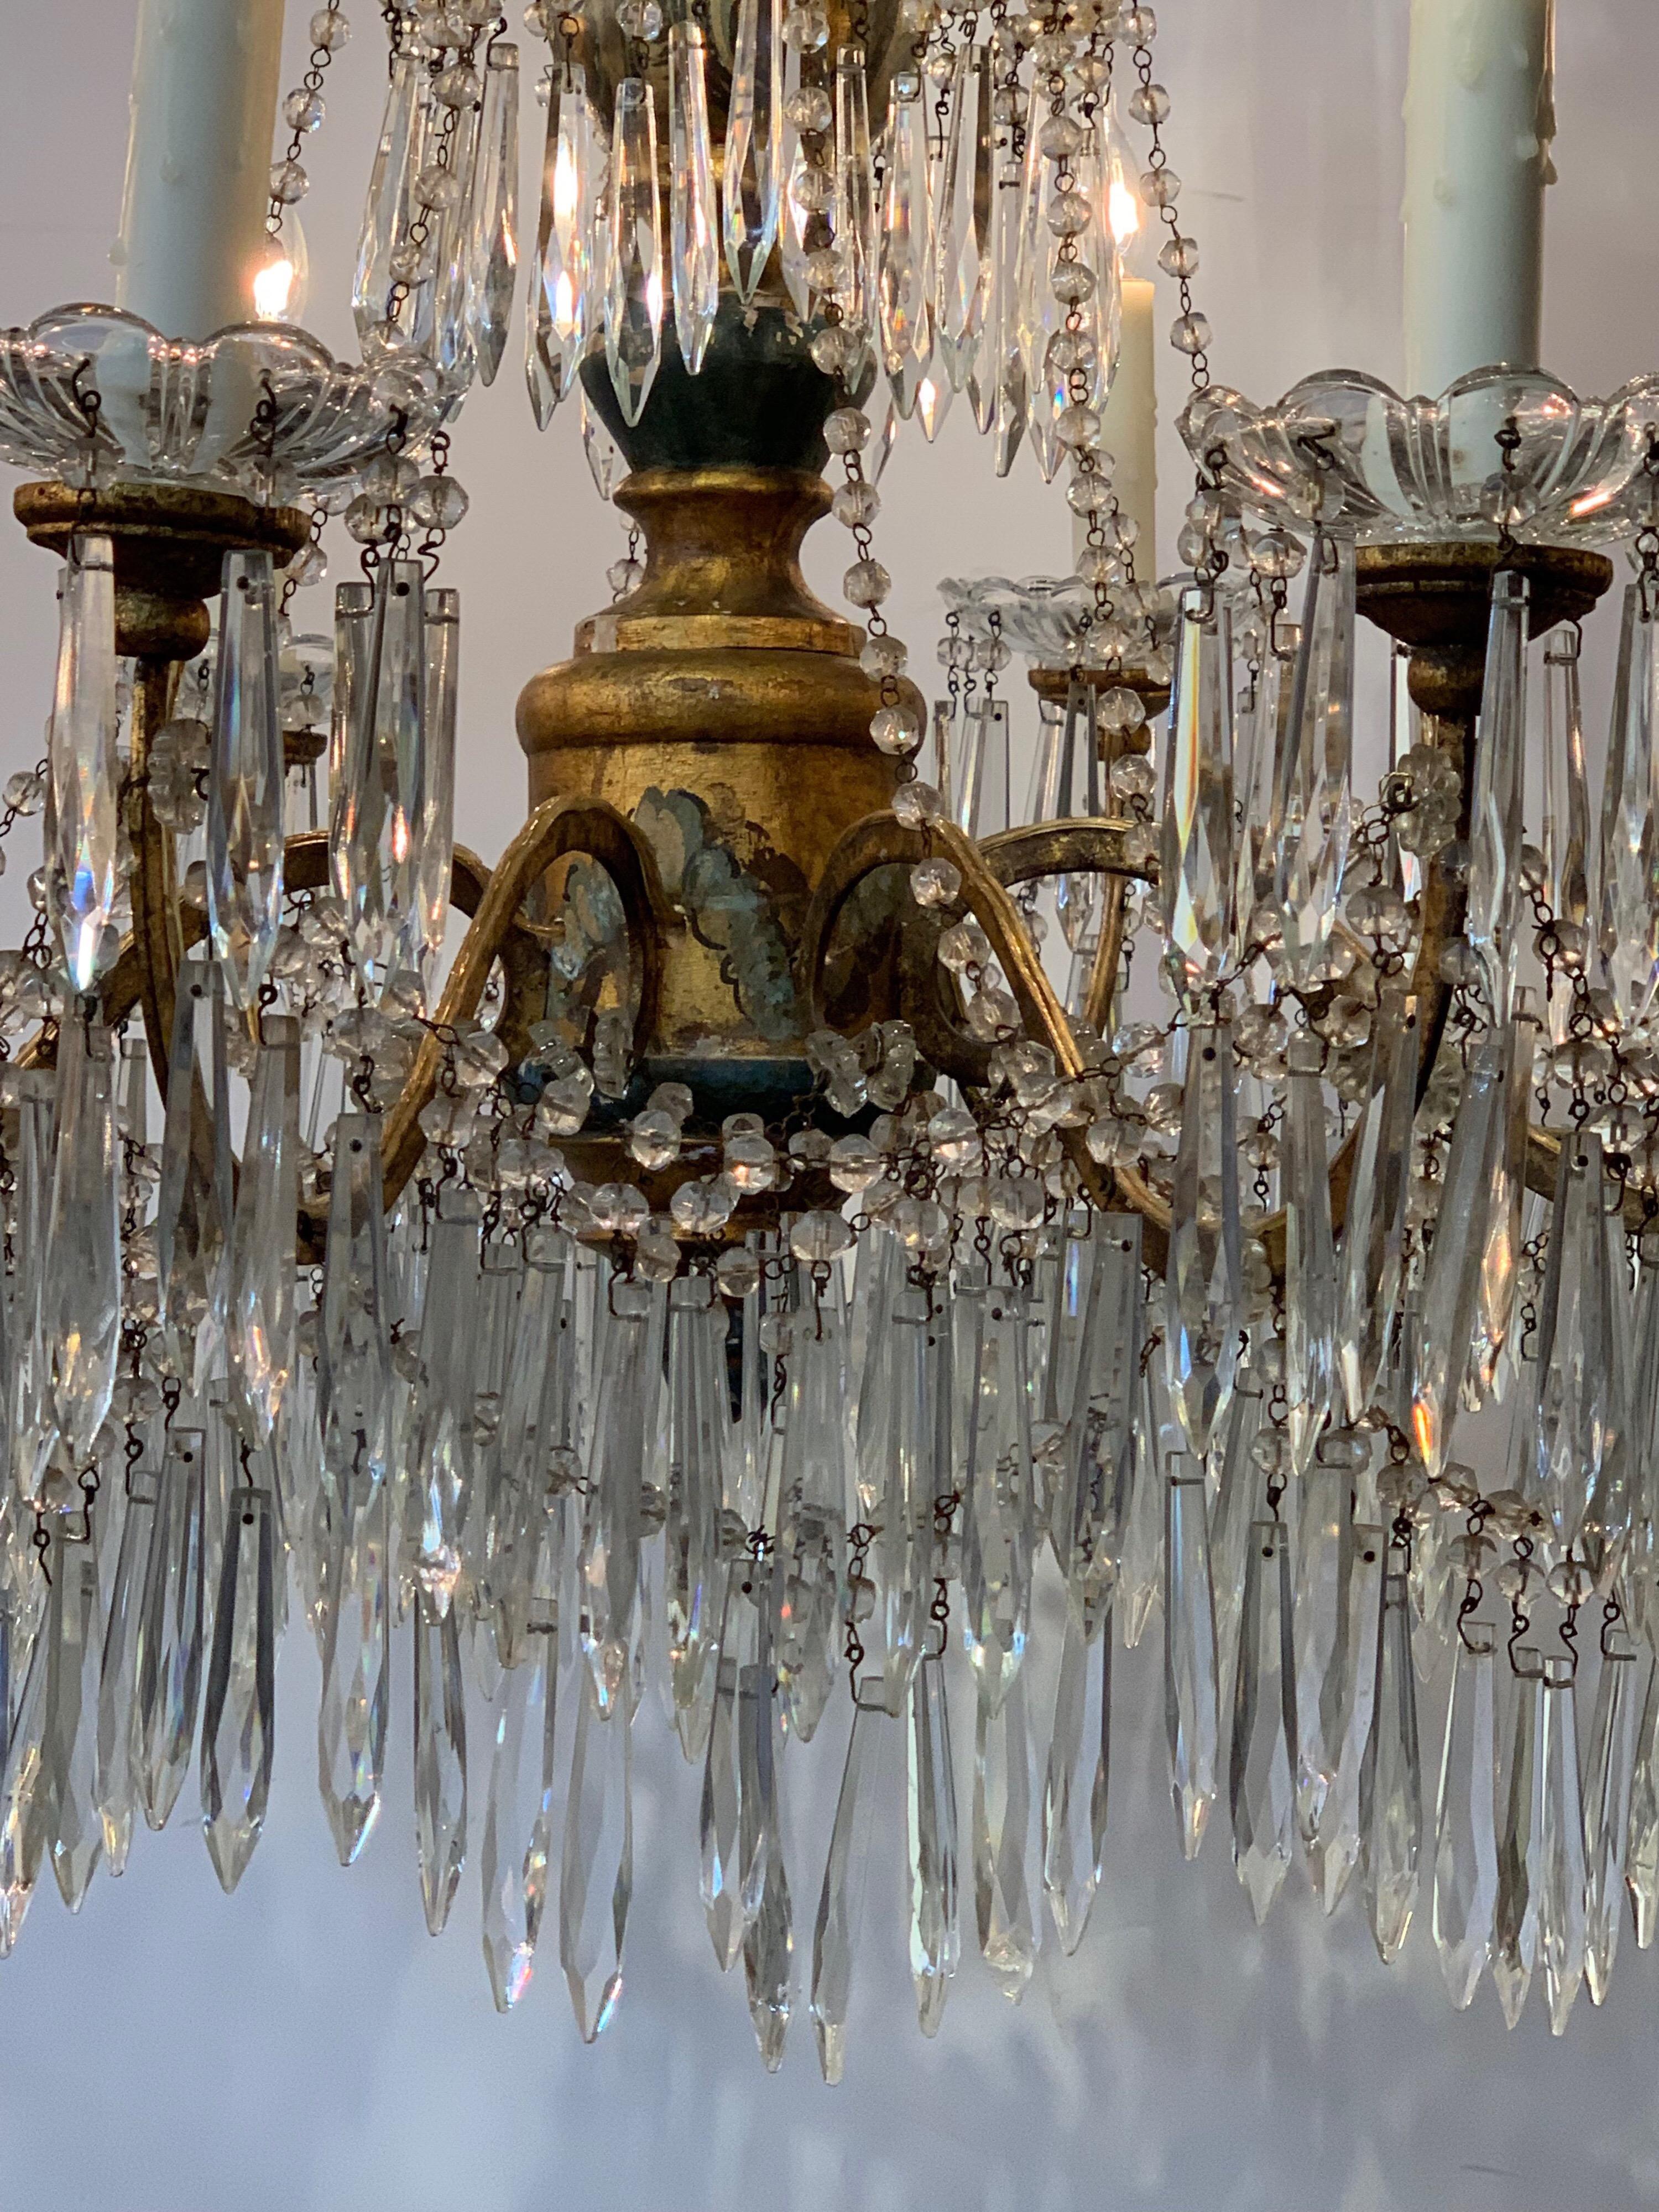 Beautiful 19th century Italian crystal chandelier with a hand painted stem,
circa 1860.